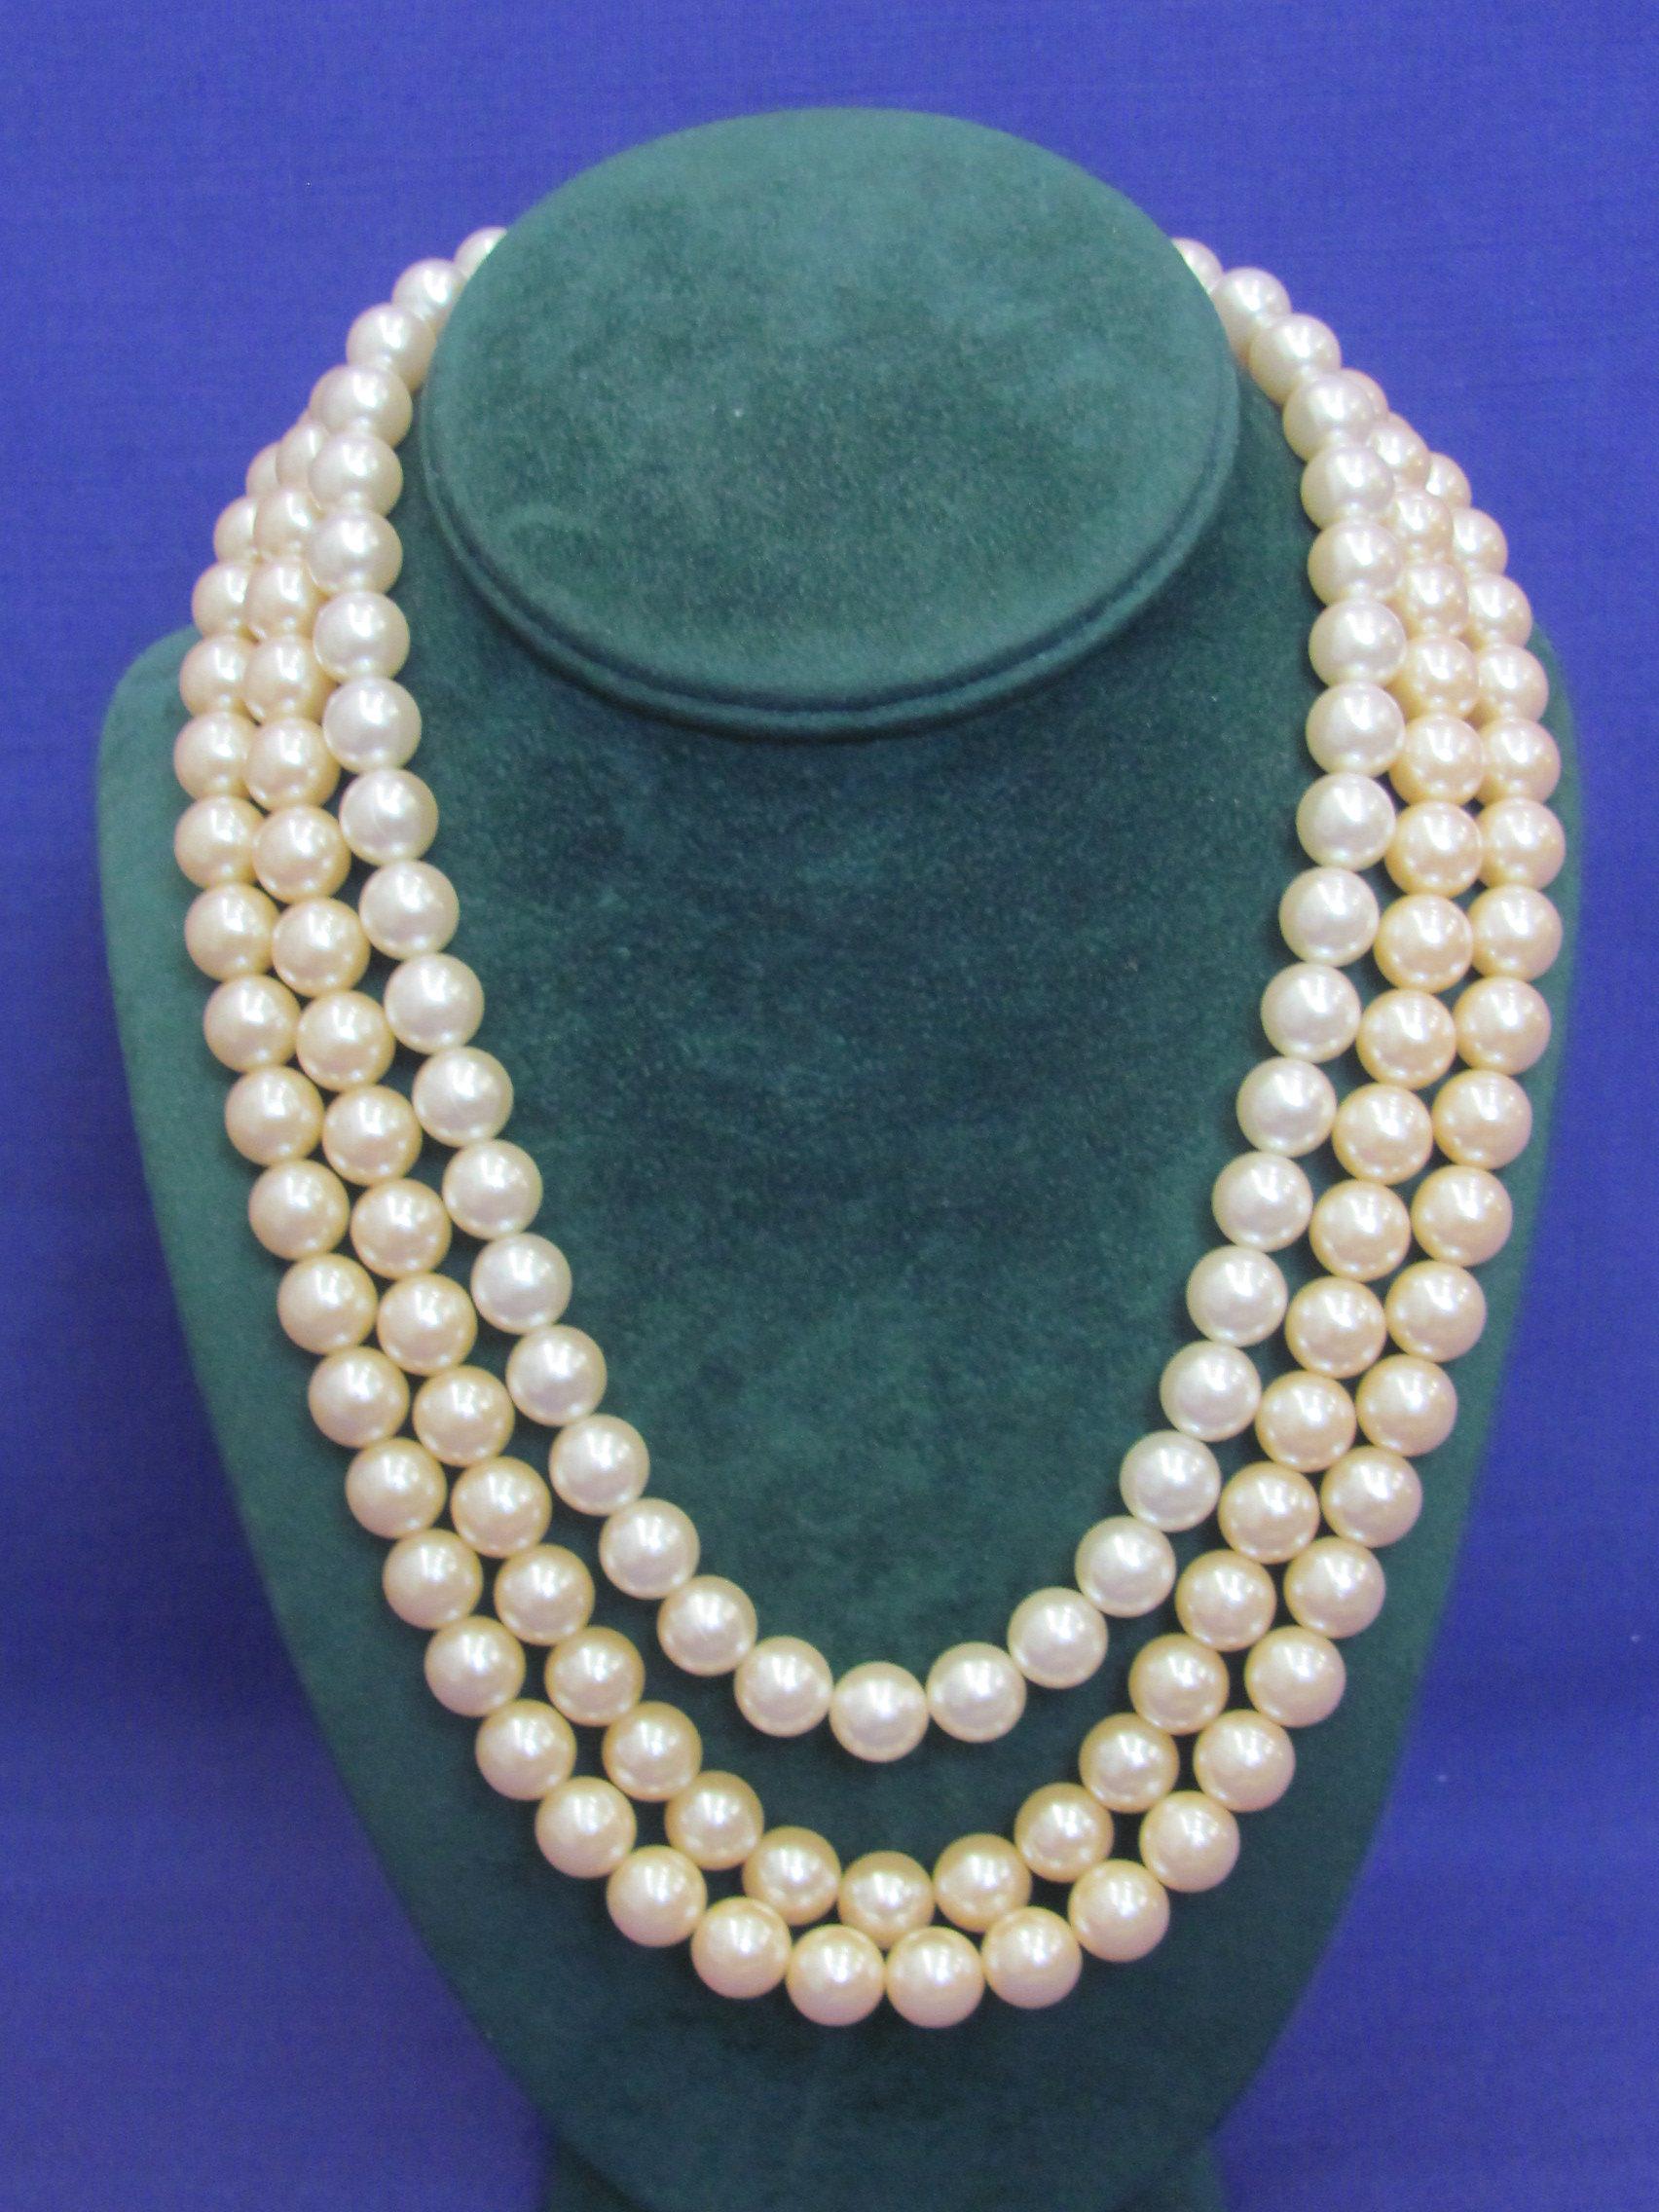 Black & White Costume Jewelry – Faux Pearls – Necklaces – Pins/Brooches – Bracelets